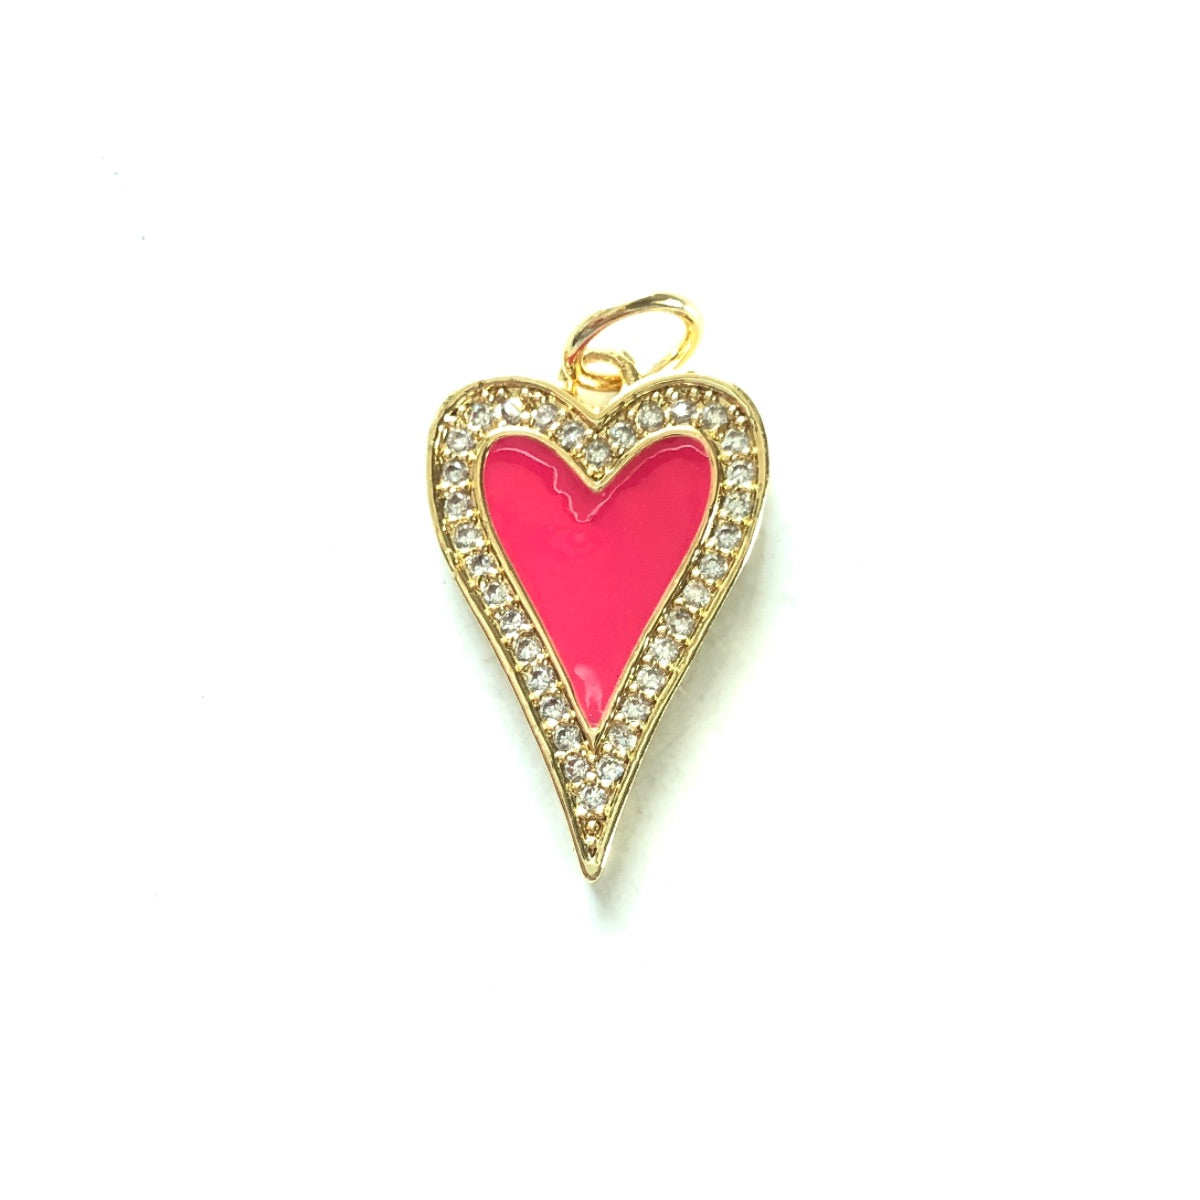 10pcs/lot 23.4*14.6mm Red, Pink, White, Black, Fuchsia Enamel CZ Pave Heart Charms-Gold Fuchsia CZ Paved Charms Hearts New Charms Arrivals Charms Beads Beyond